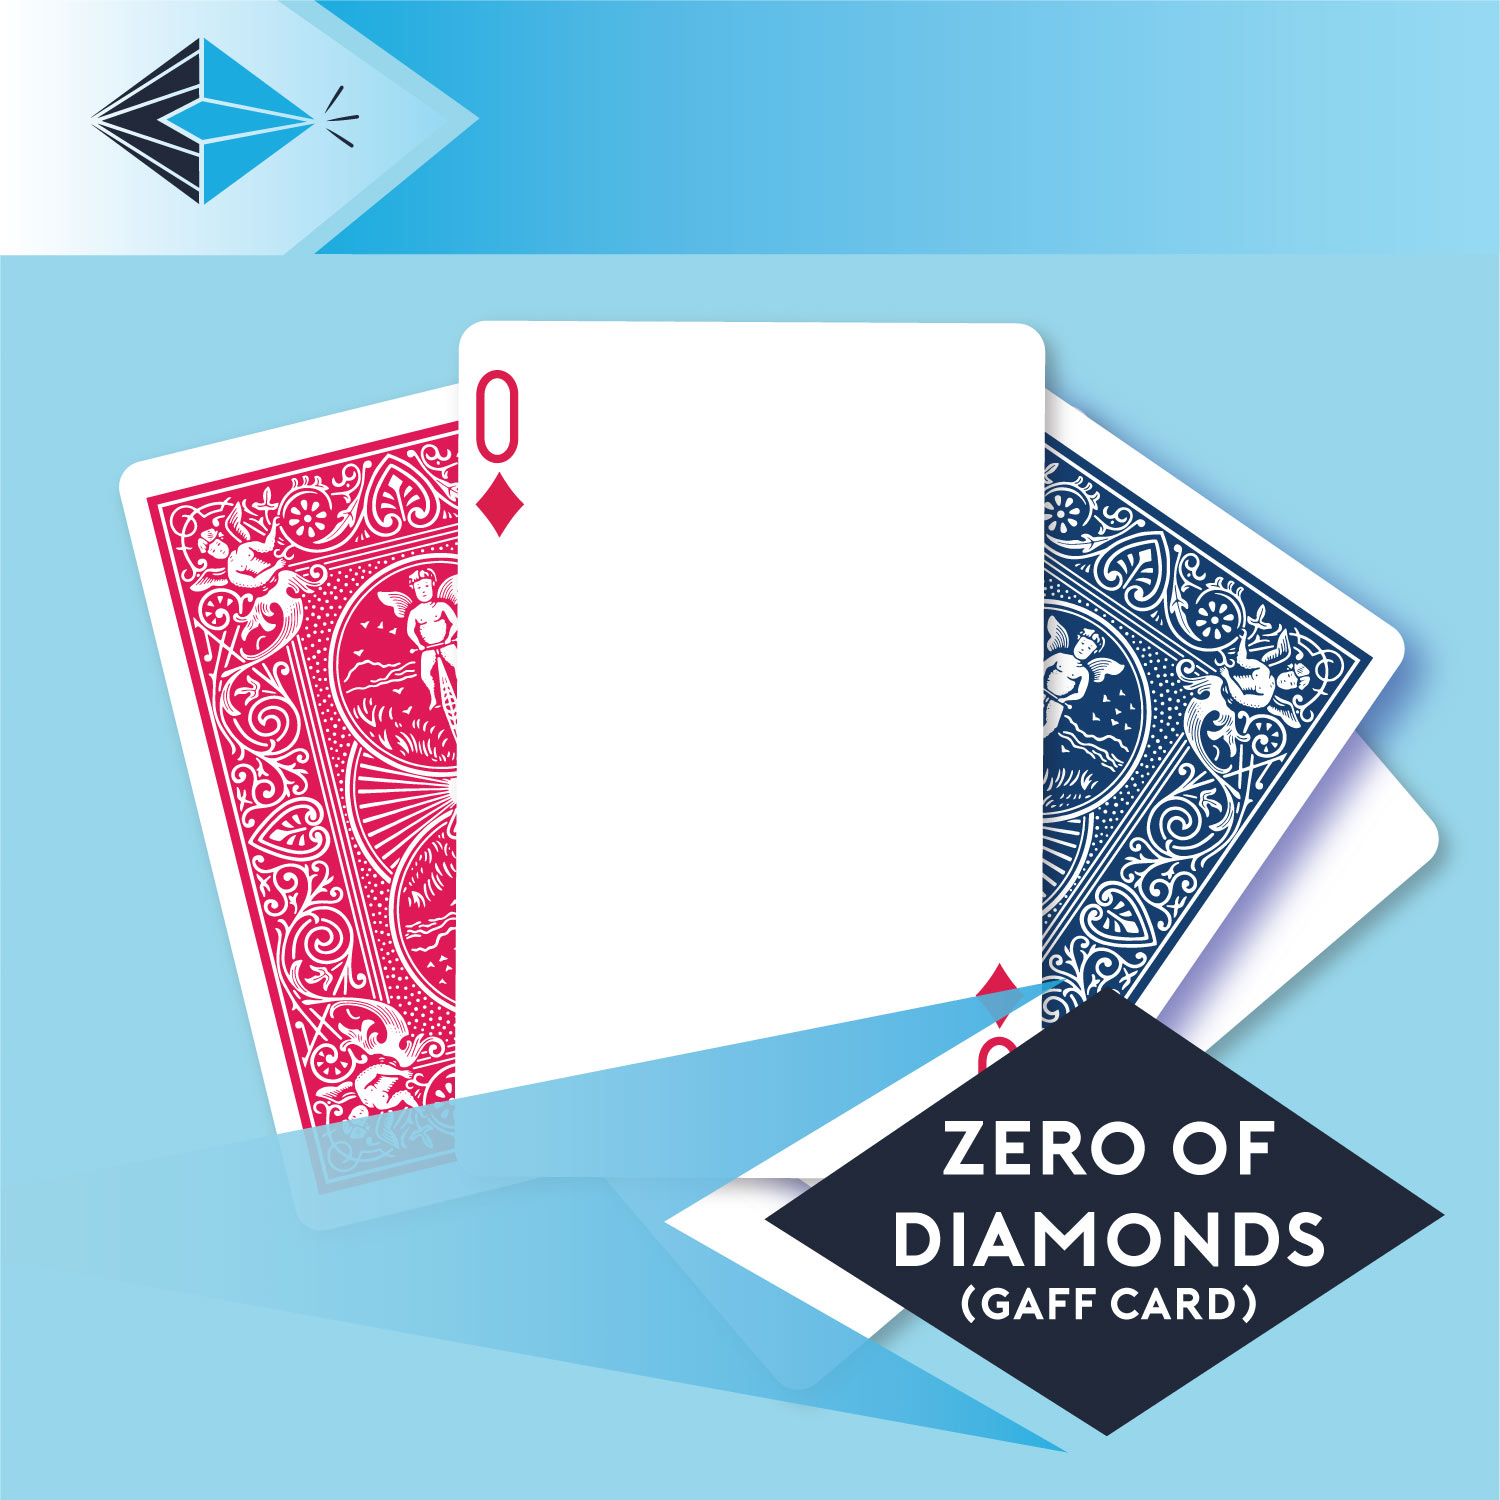 zero of diamonds gaff card 22 playing card for magicians printing printers Stockport Manchester UK